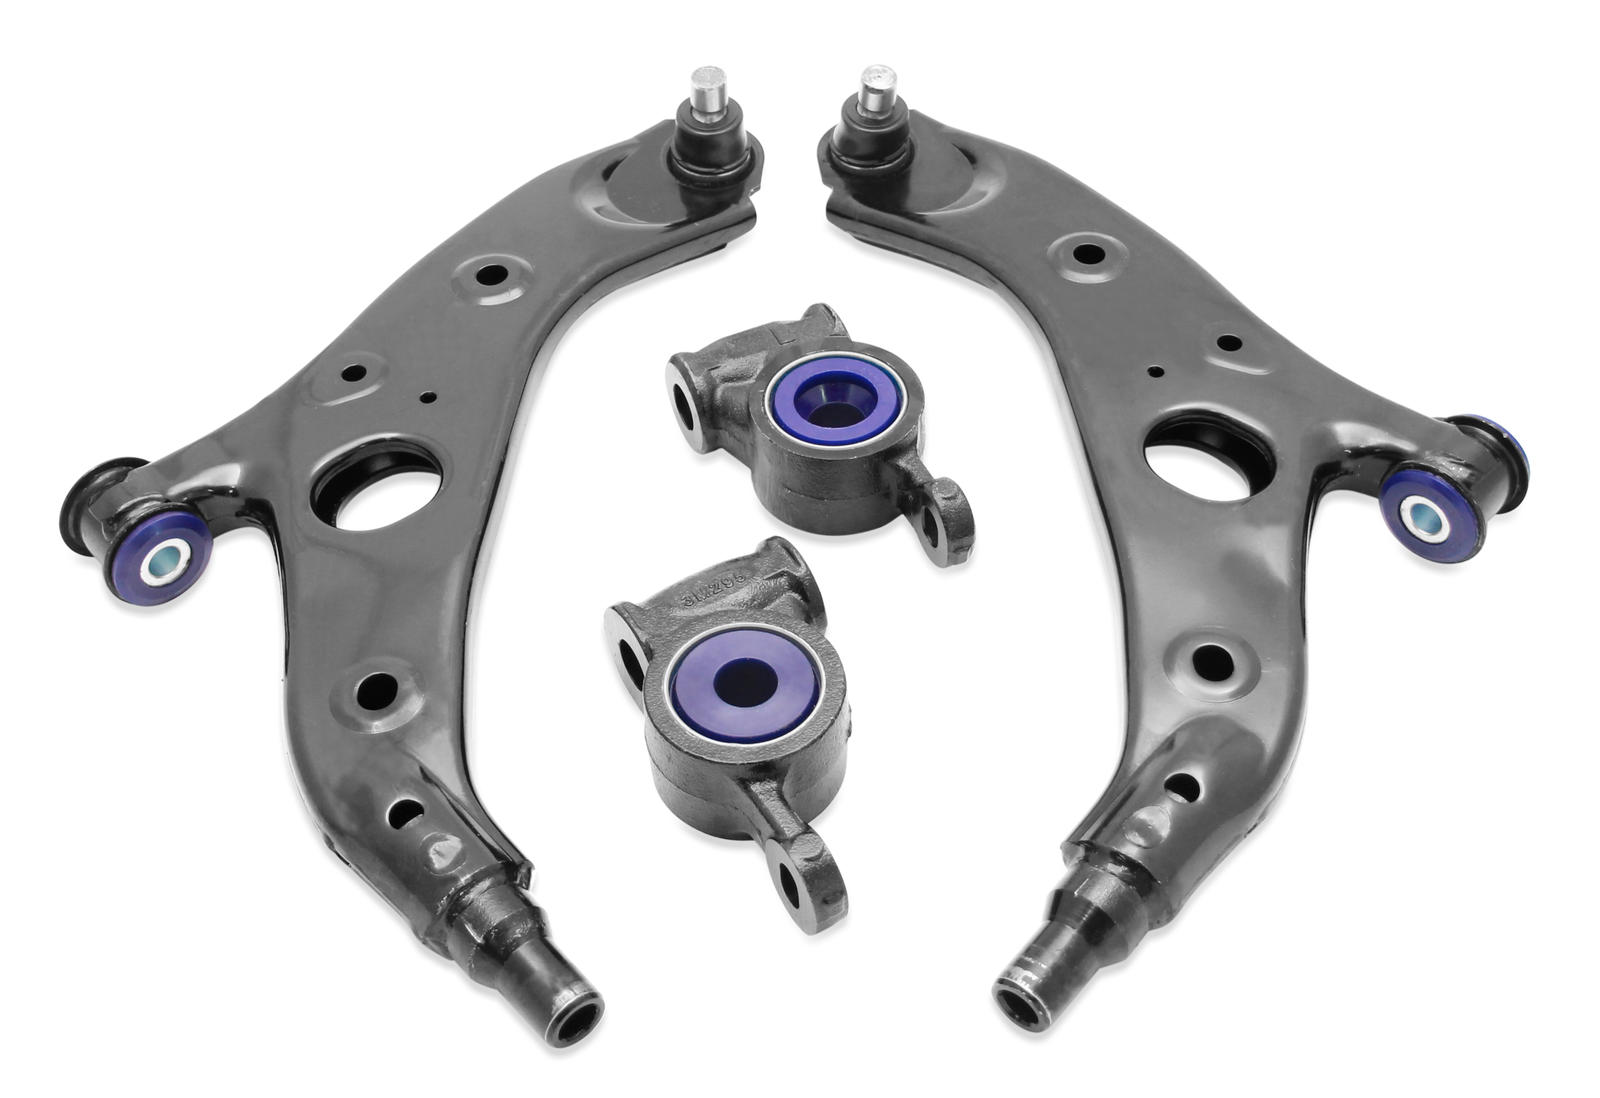 Front Lower Control Arm Assembly Kit including Ball Joints to suit Mazda 6 & CX-5 2012-2017